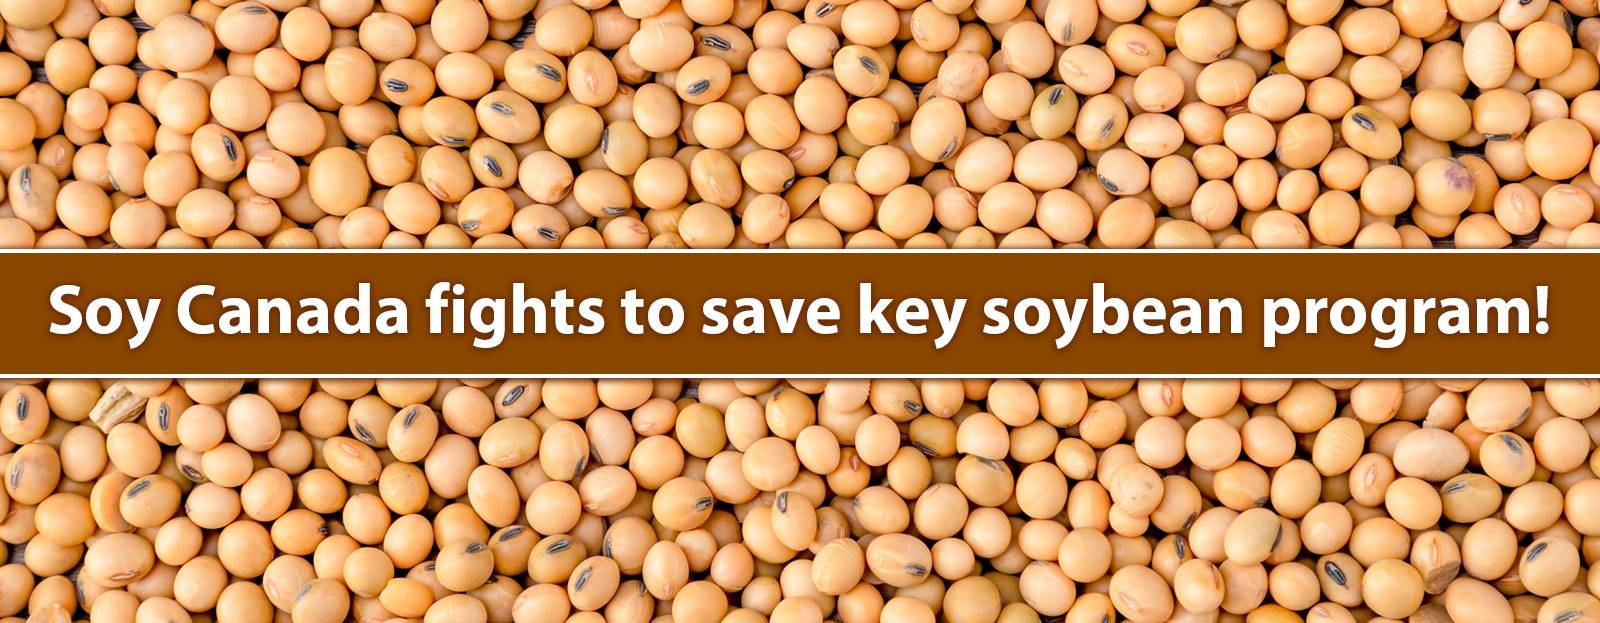 Soy Canada fights to save key soybean program